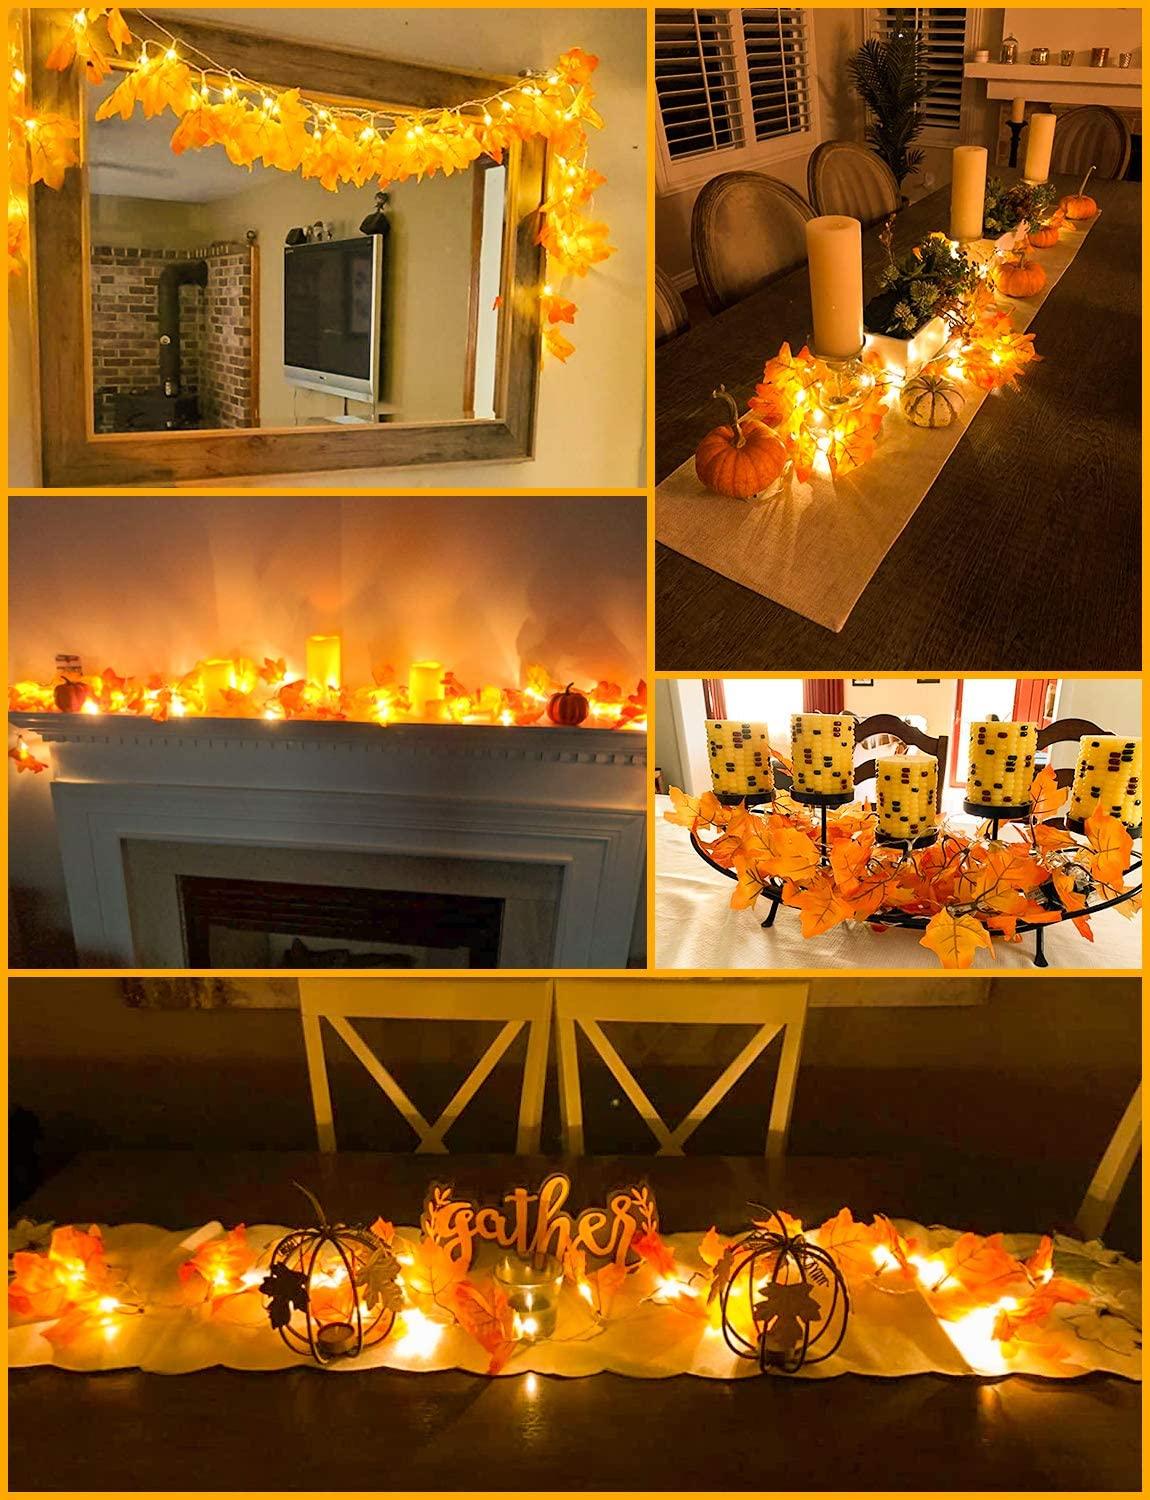 [2 Pcs] Fall Decor for Home Thanksgiving Decorations Lighted Fall Garland, Total 16.4ft 40 LED, Fall Decorations Thanksgiving Halloween Decor - Lasercutwraps Shop